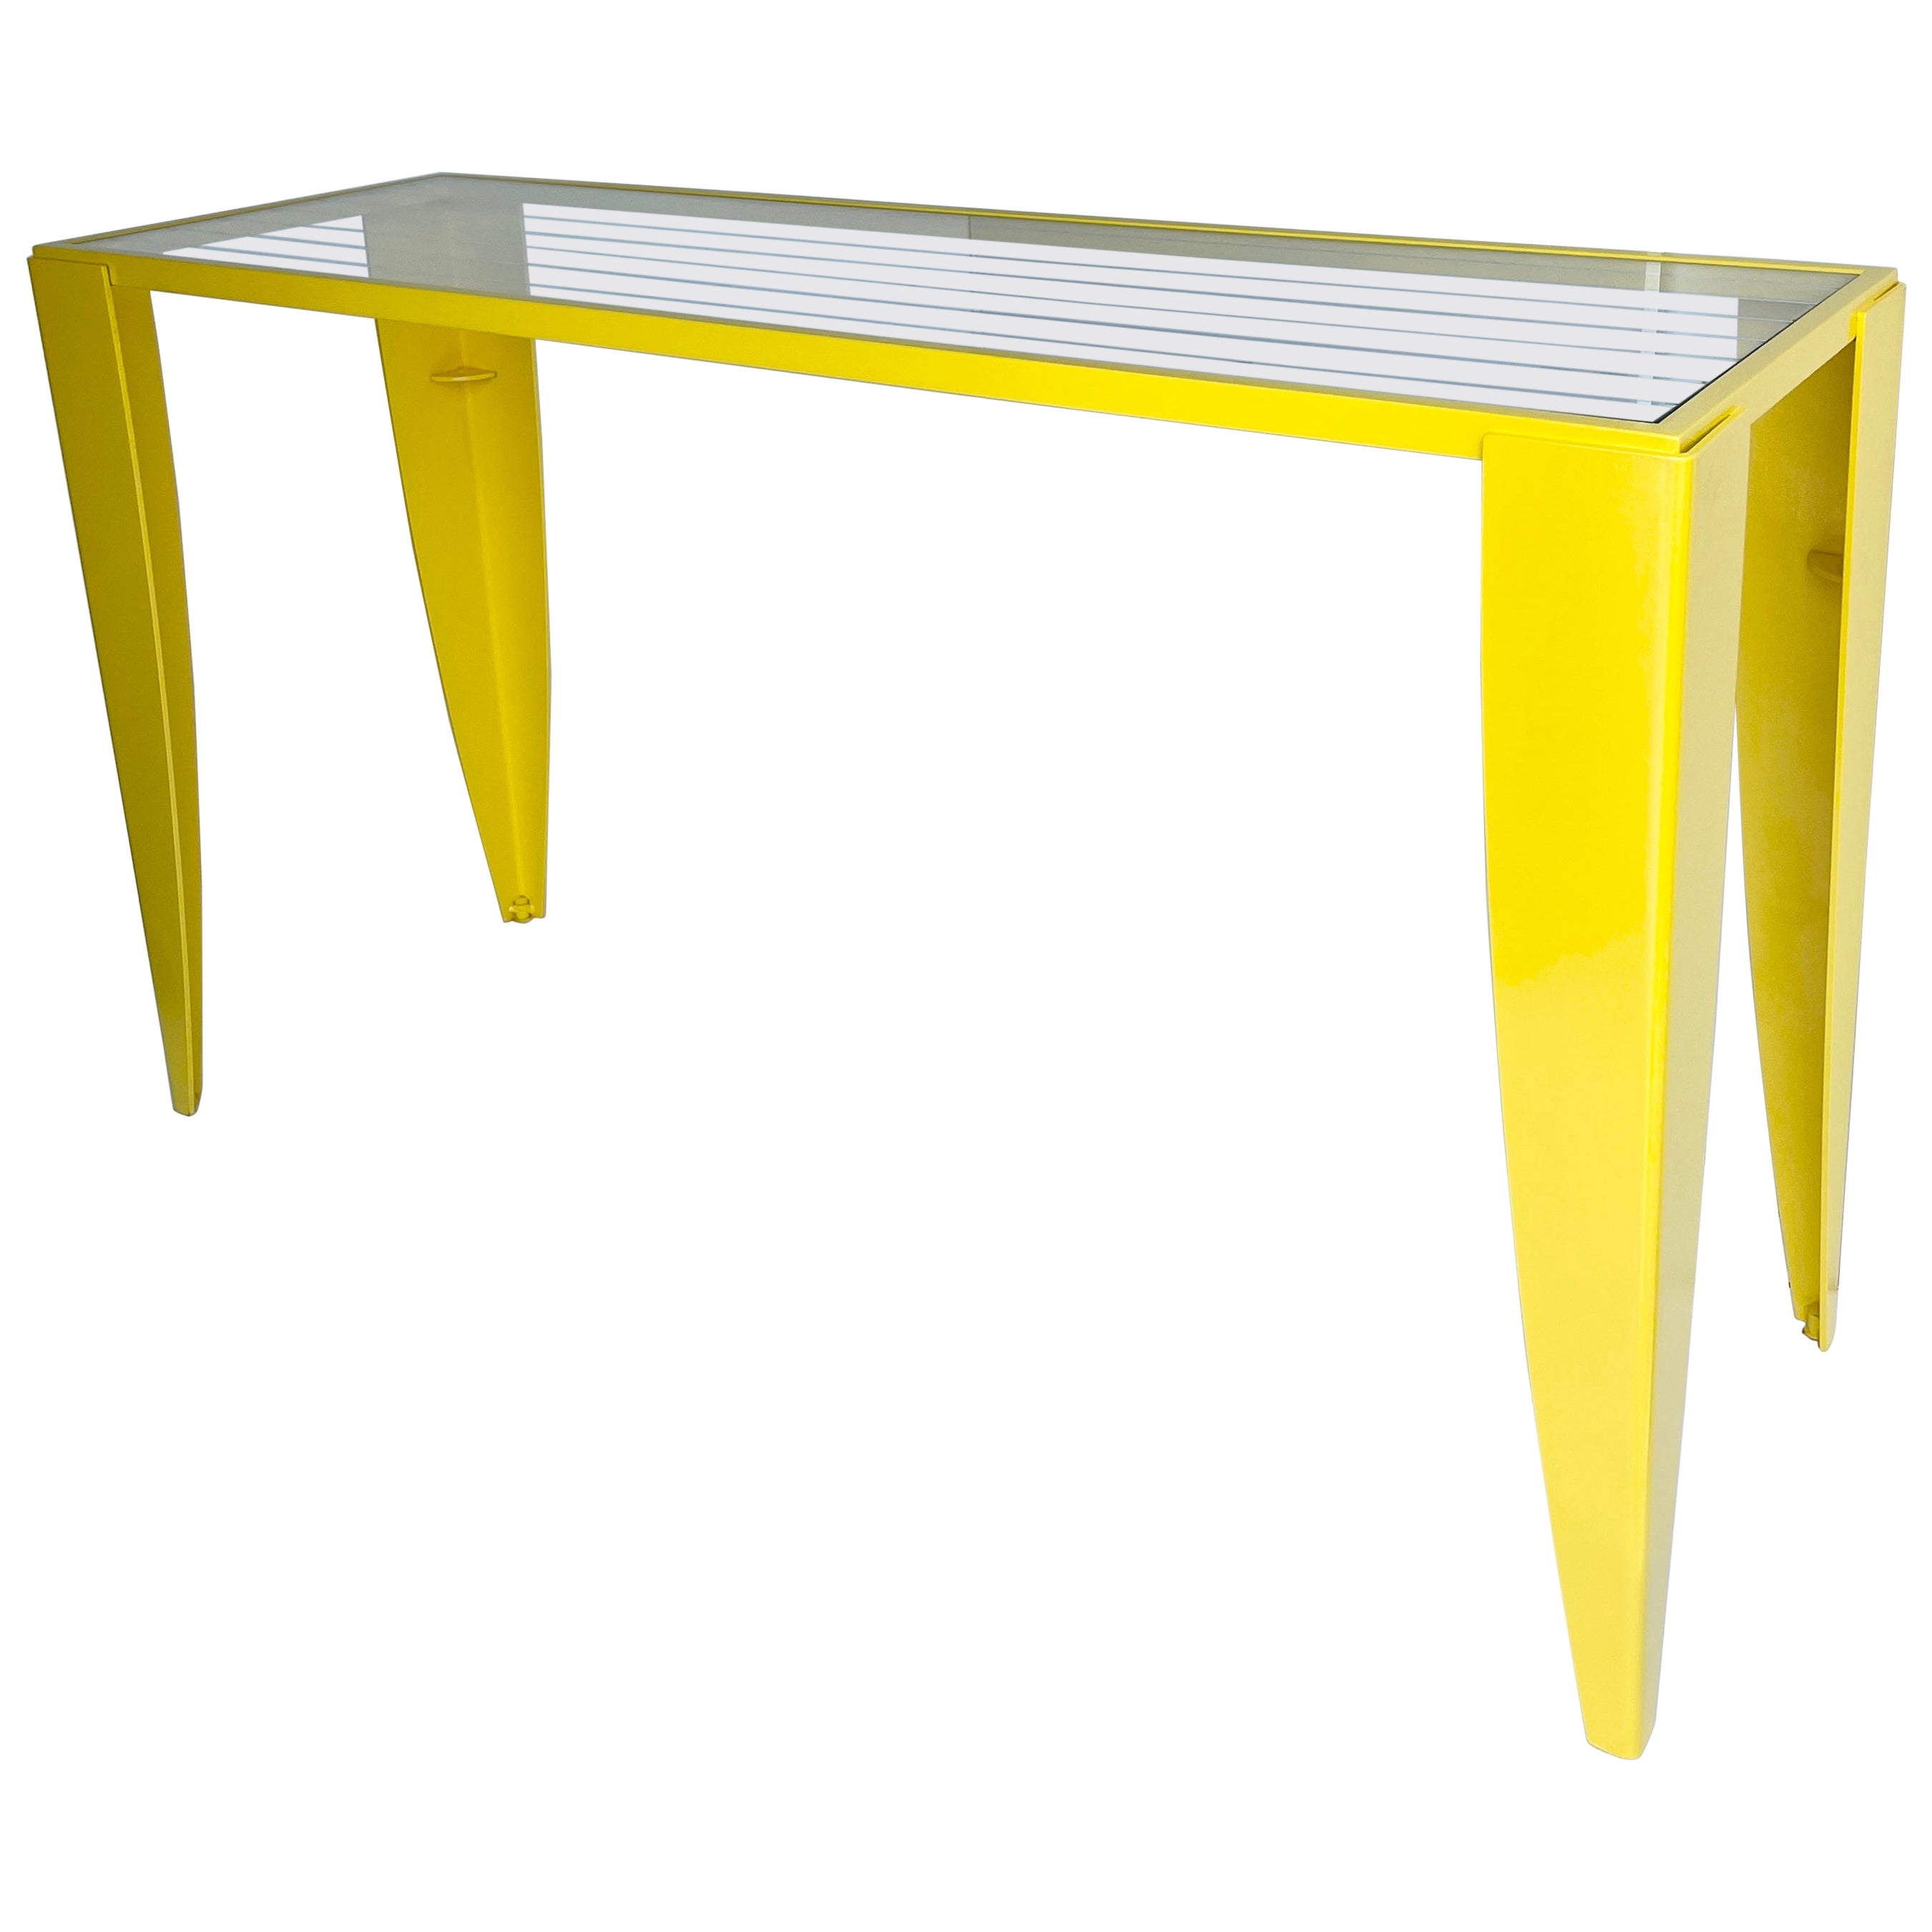 Italian Console Table with Glass Top, Powder Coated Yellow, Mid-Century Modern